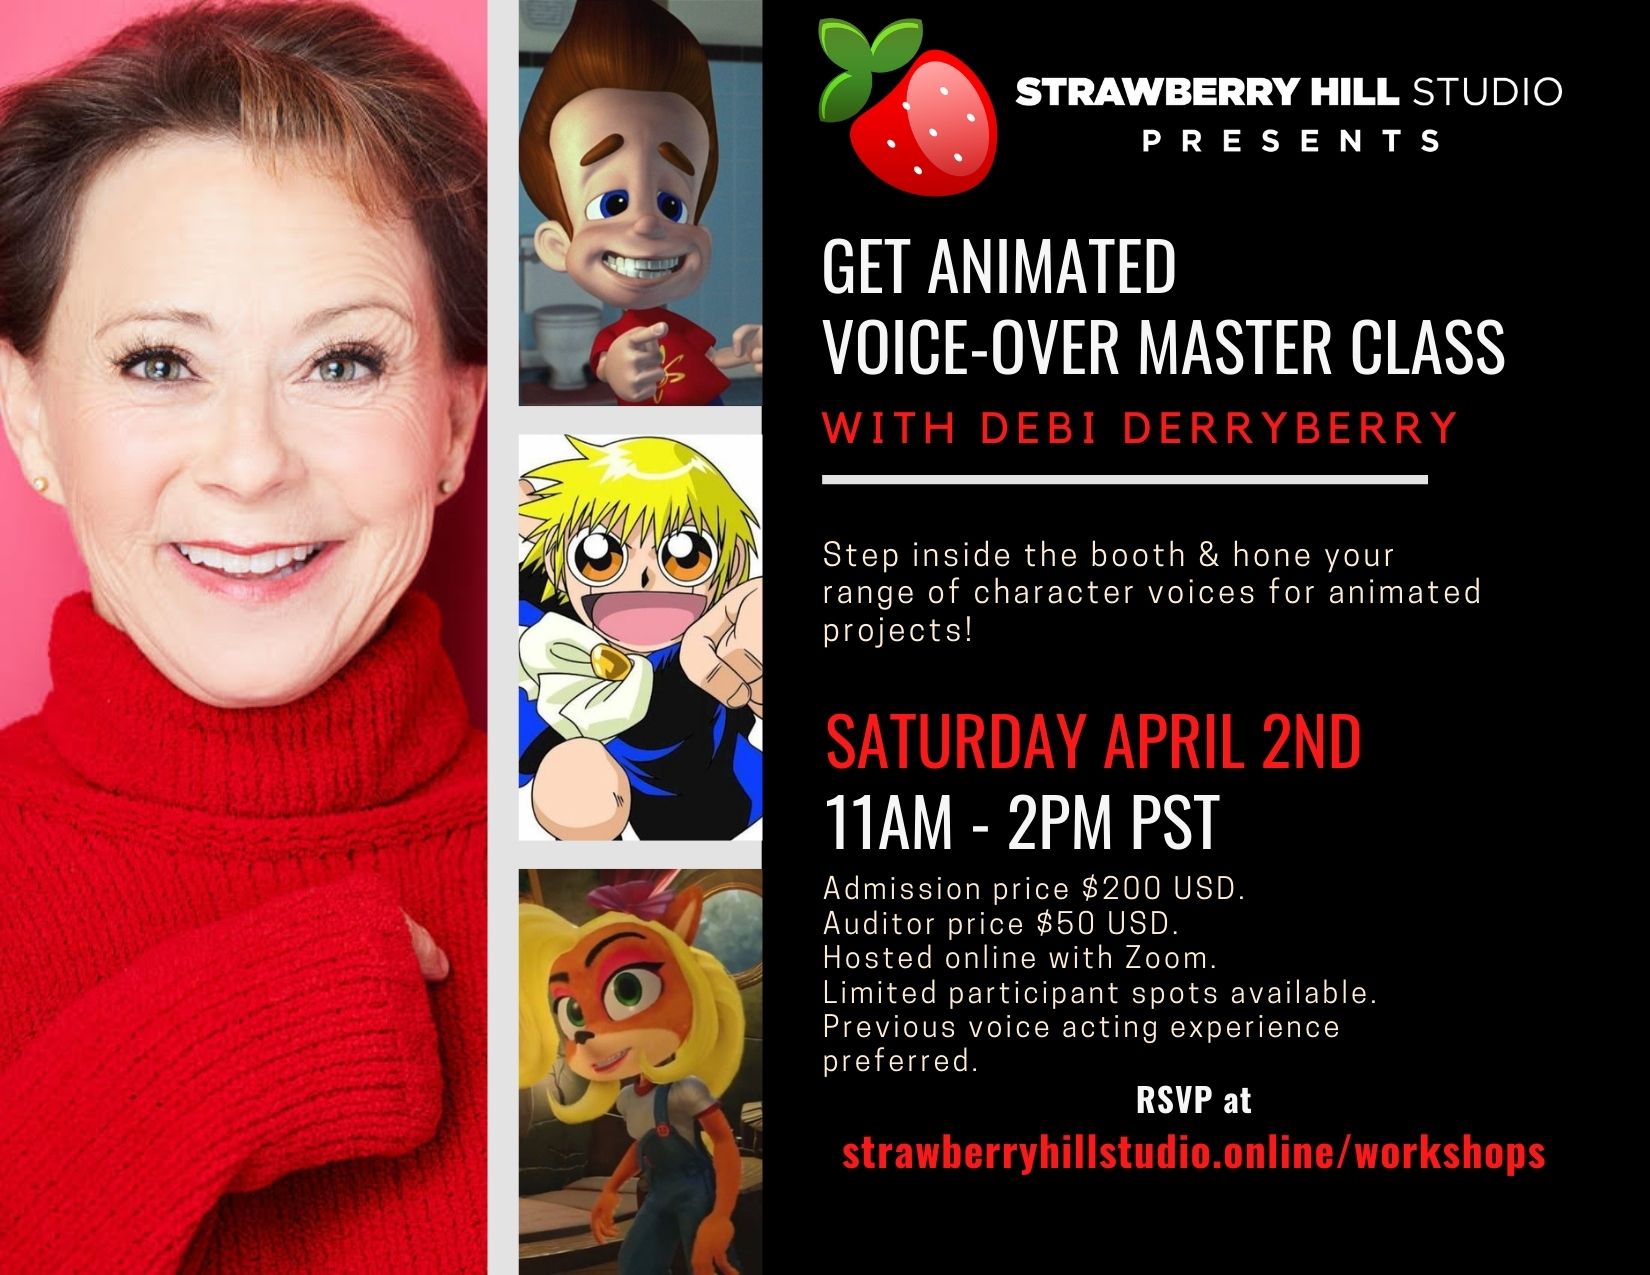 Get Animated Voice-Over Master Class w/ Debi Derryberry